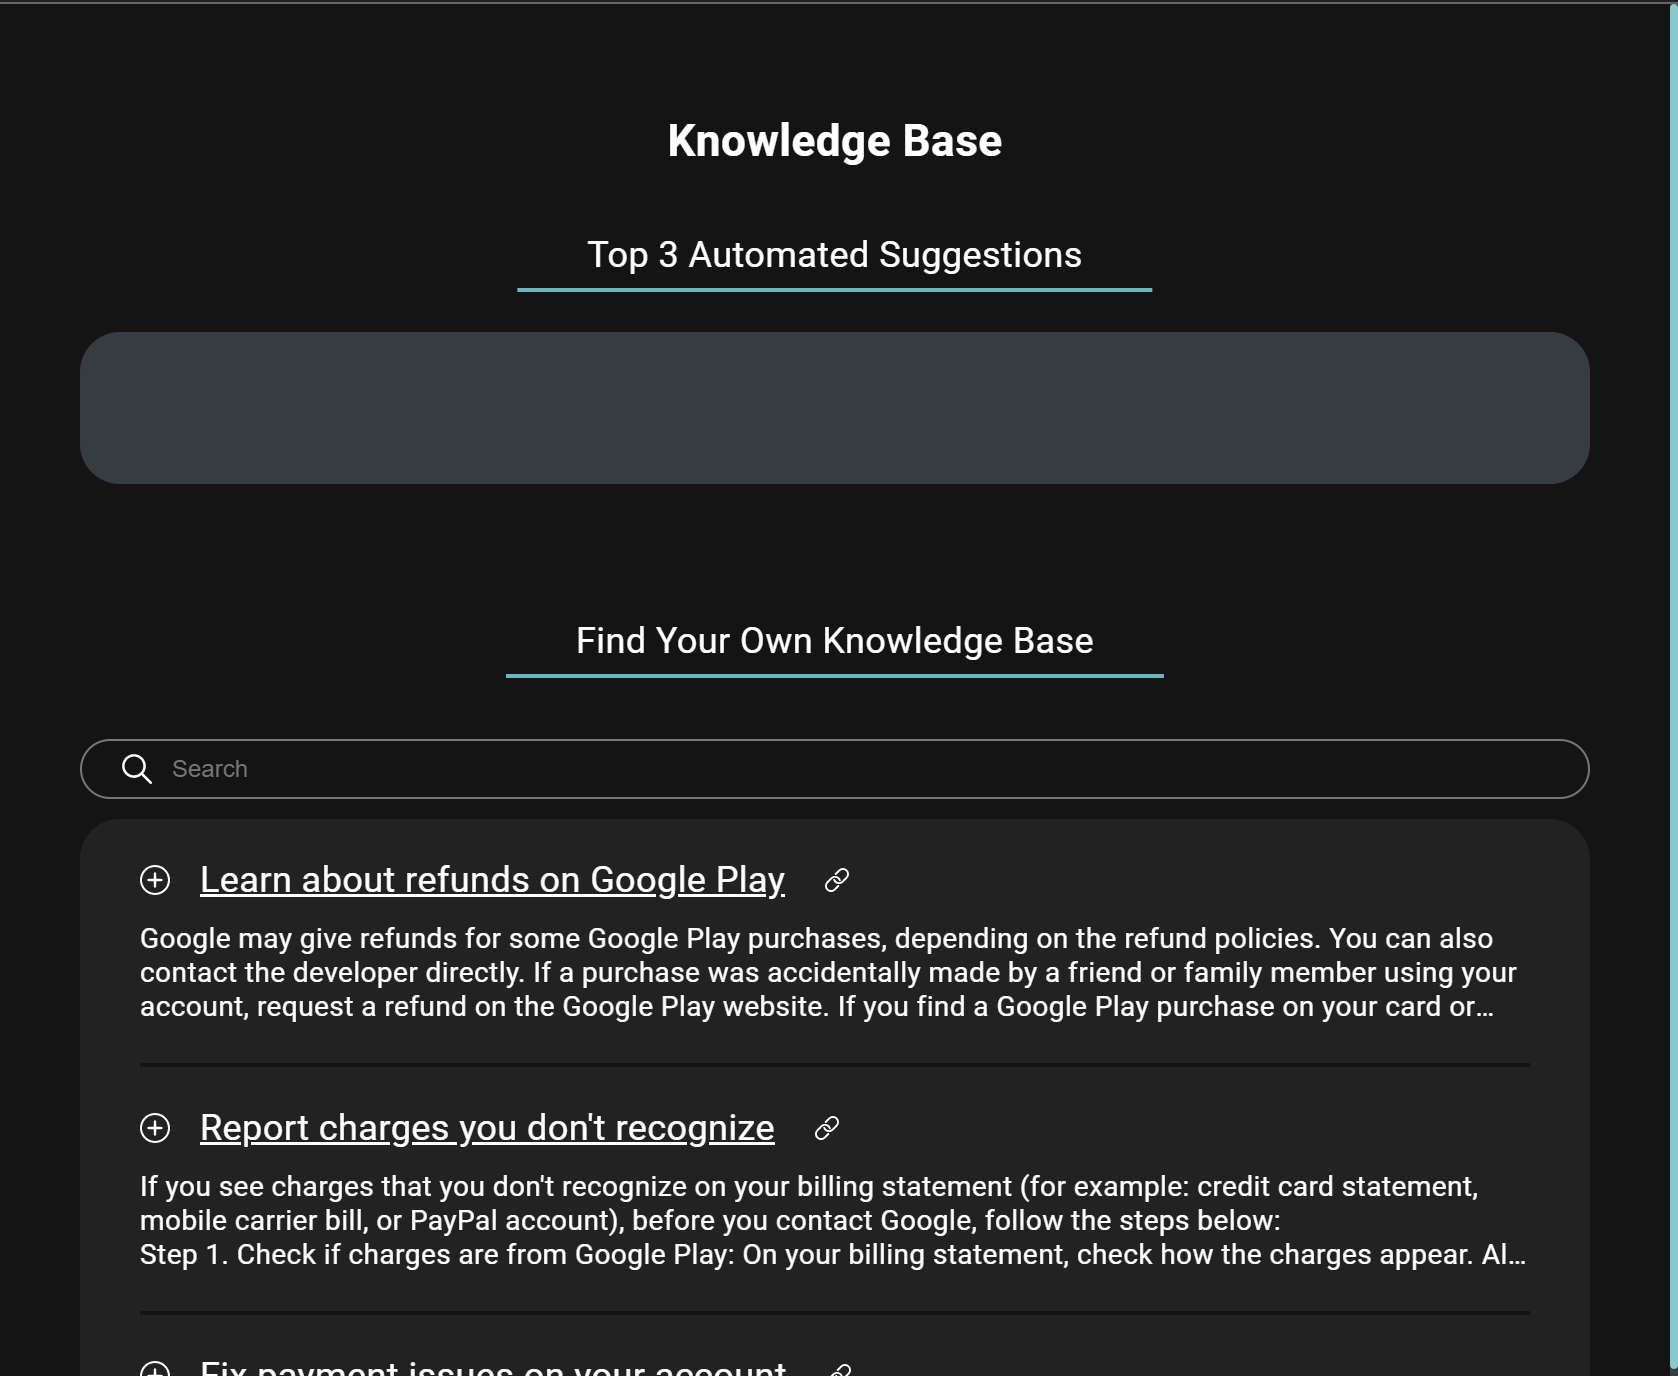 Get automated suggestions from your custom knowledge base, putting accurate information at your agents' fingertips.